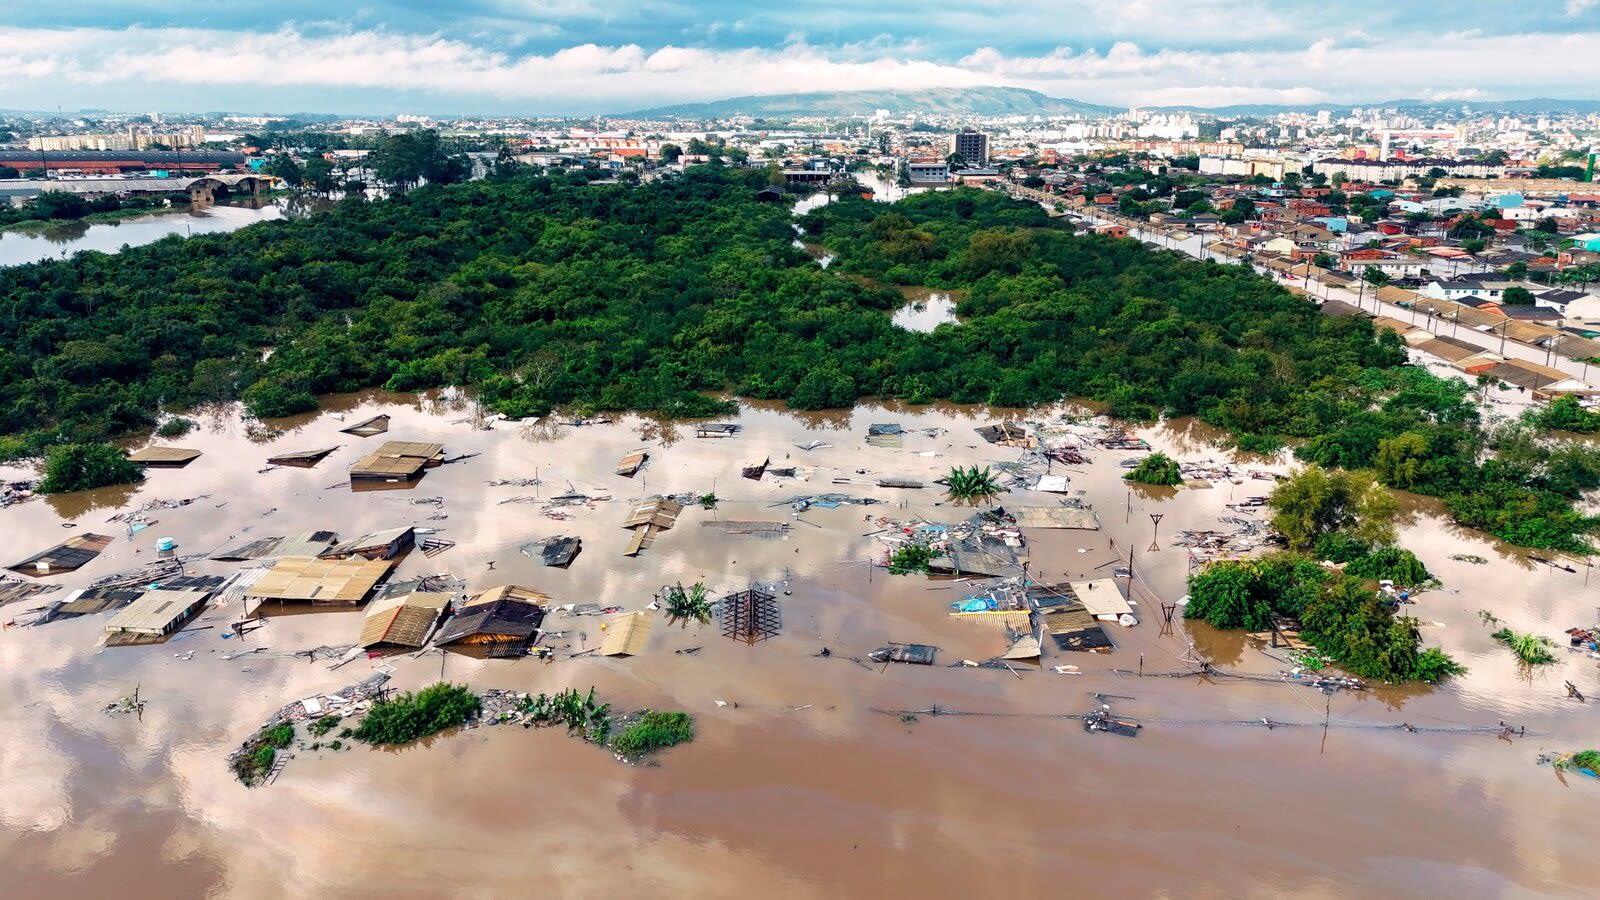 Brazil flooding: At least 75 people have died and 103 are missing, authorities say